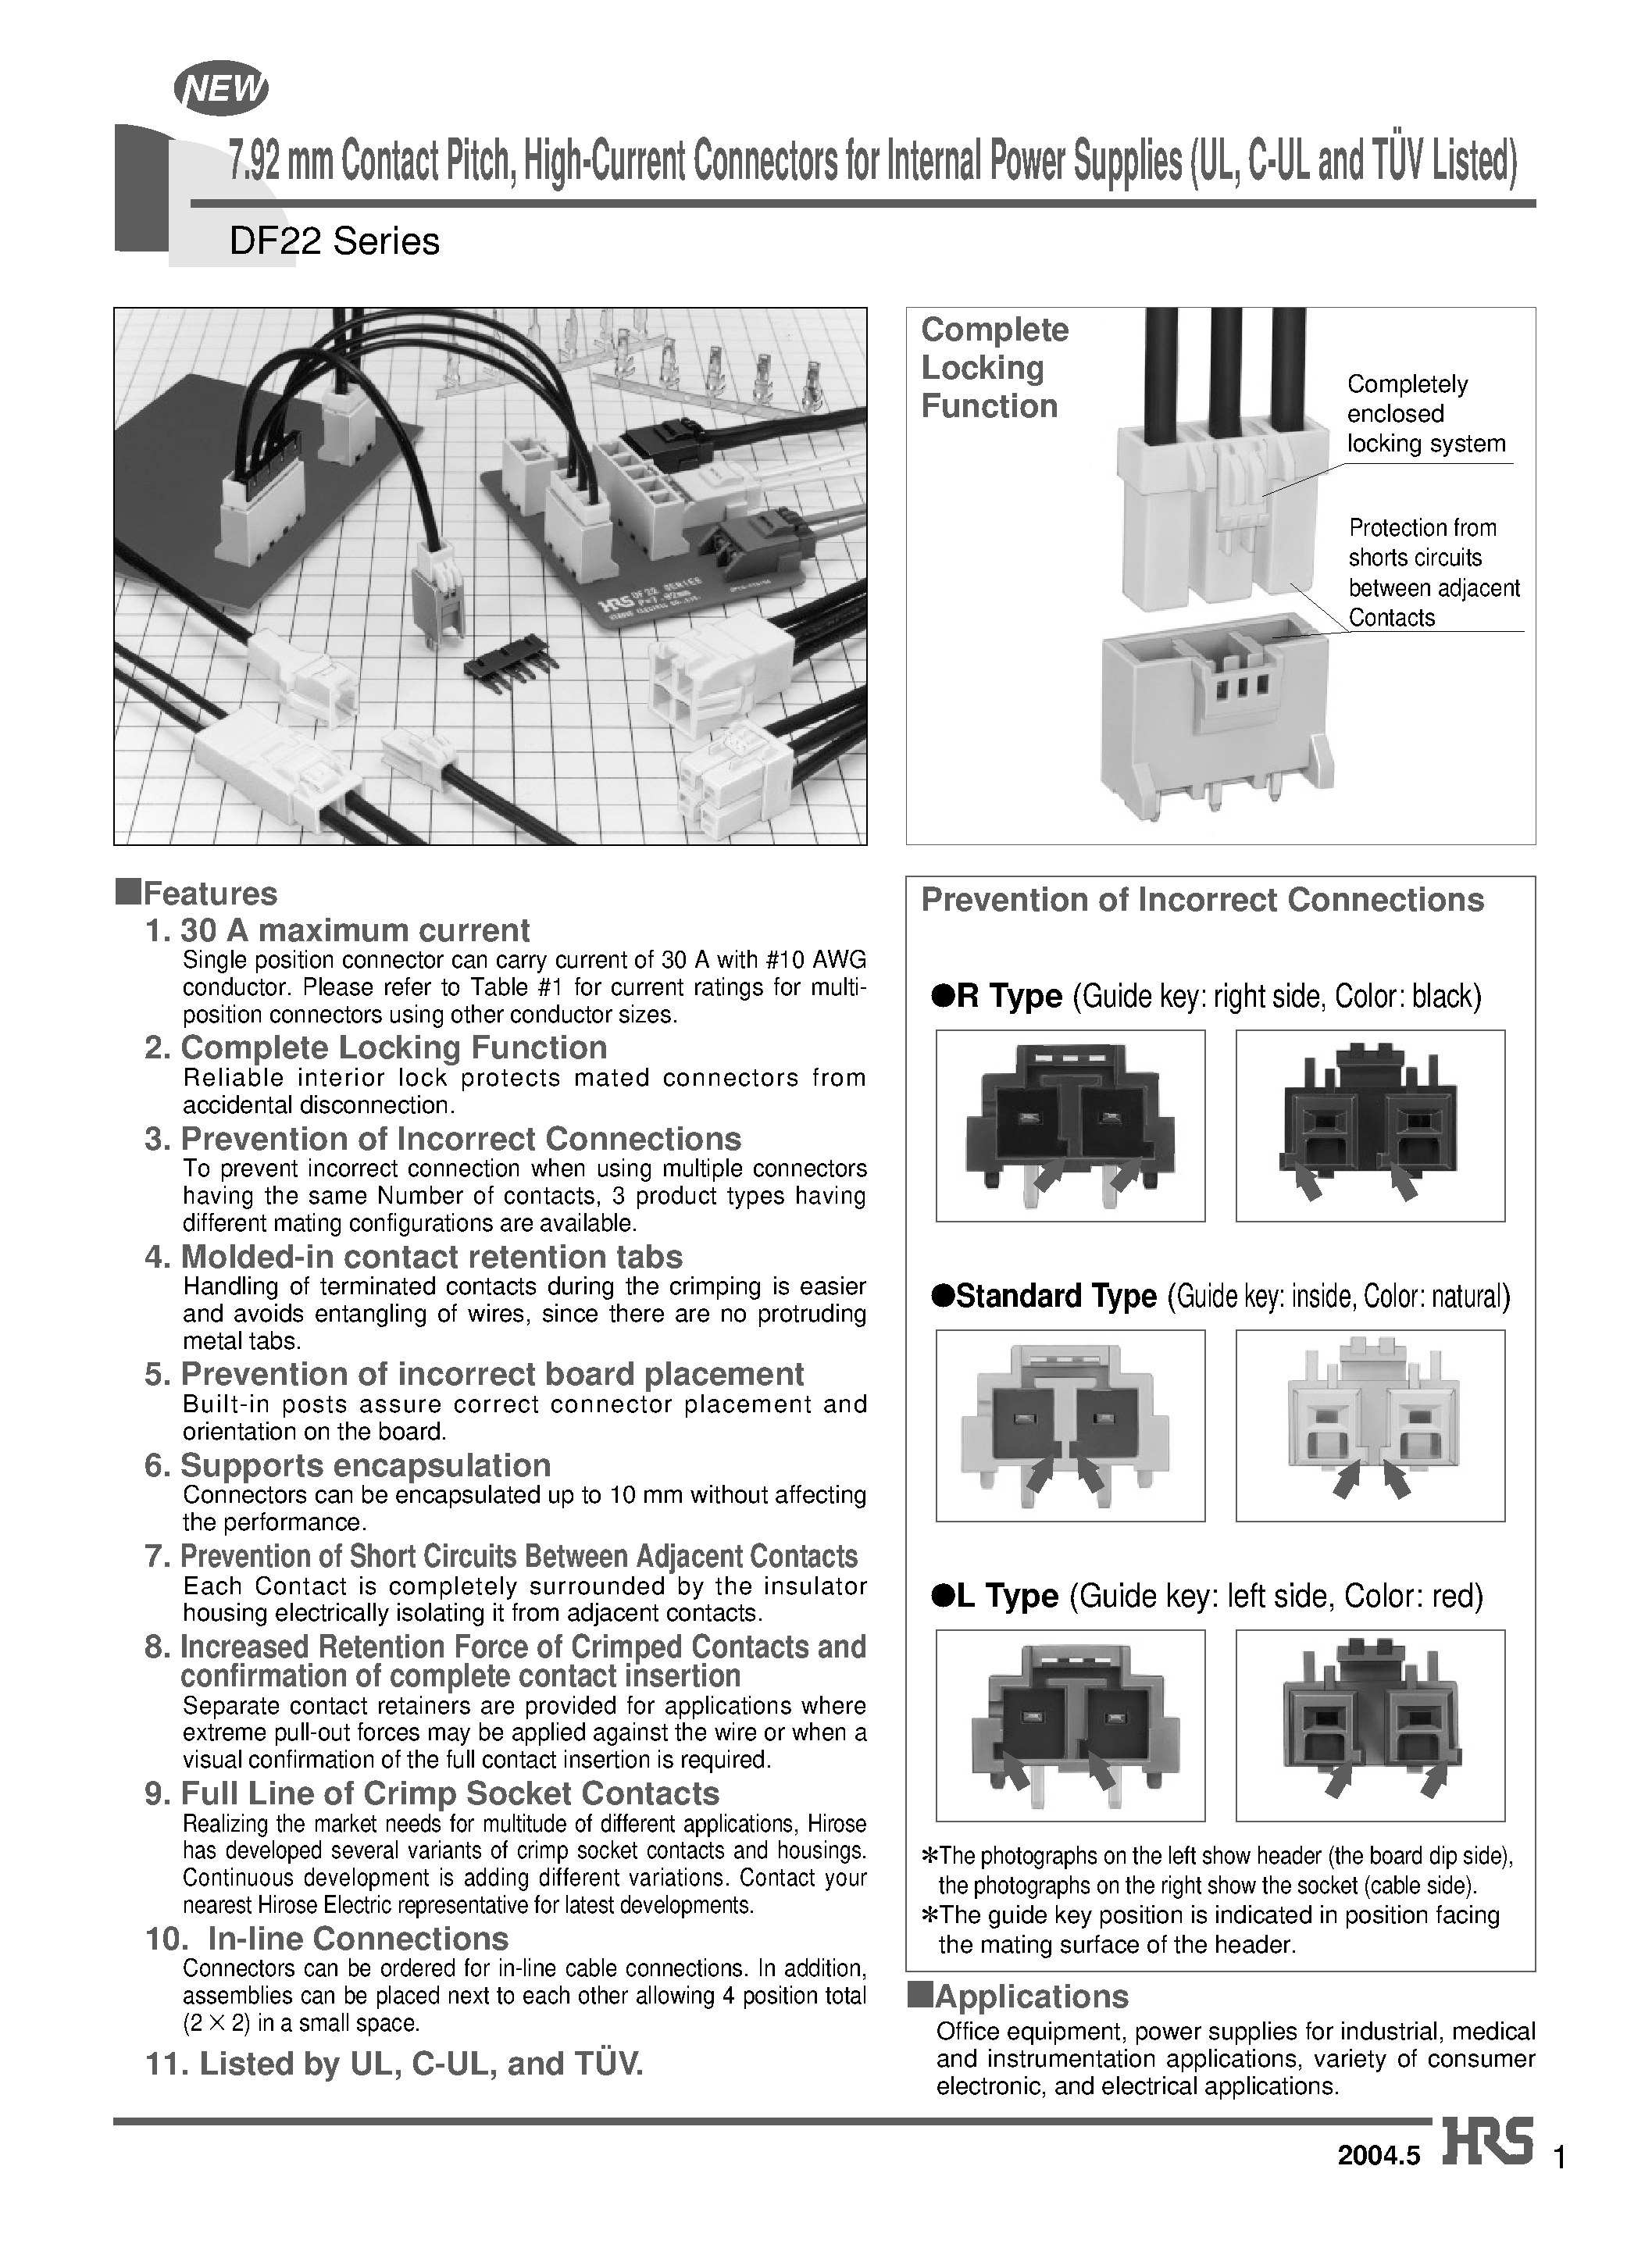 Даташит DF22AL-3P-7.92C - 7.92 mm Contact Pitch/ High-Current Connectors for Internal Power Supplies (UL/ C-UL and TUV Listed) страница 1